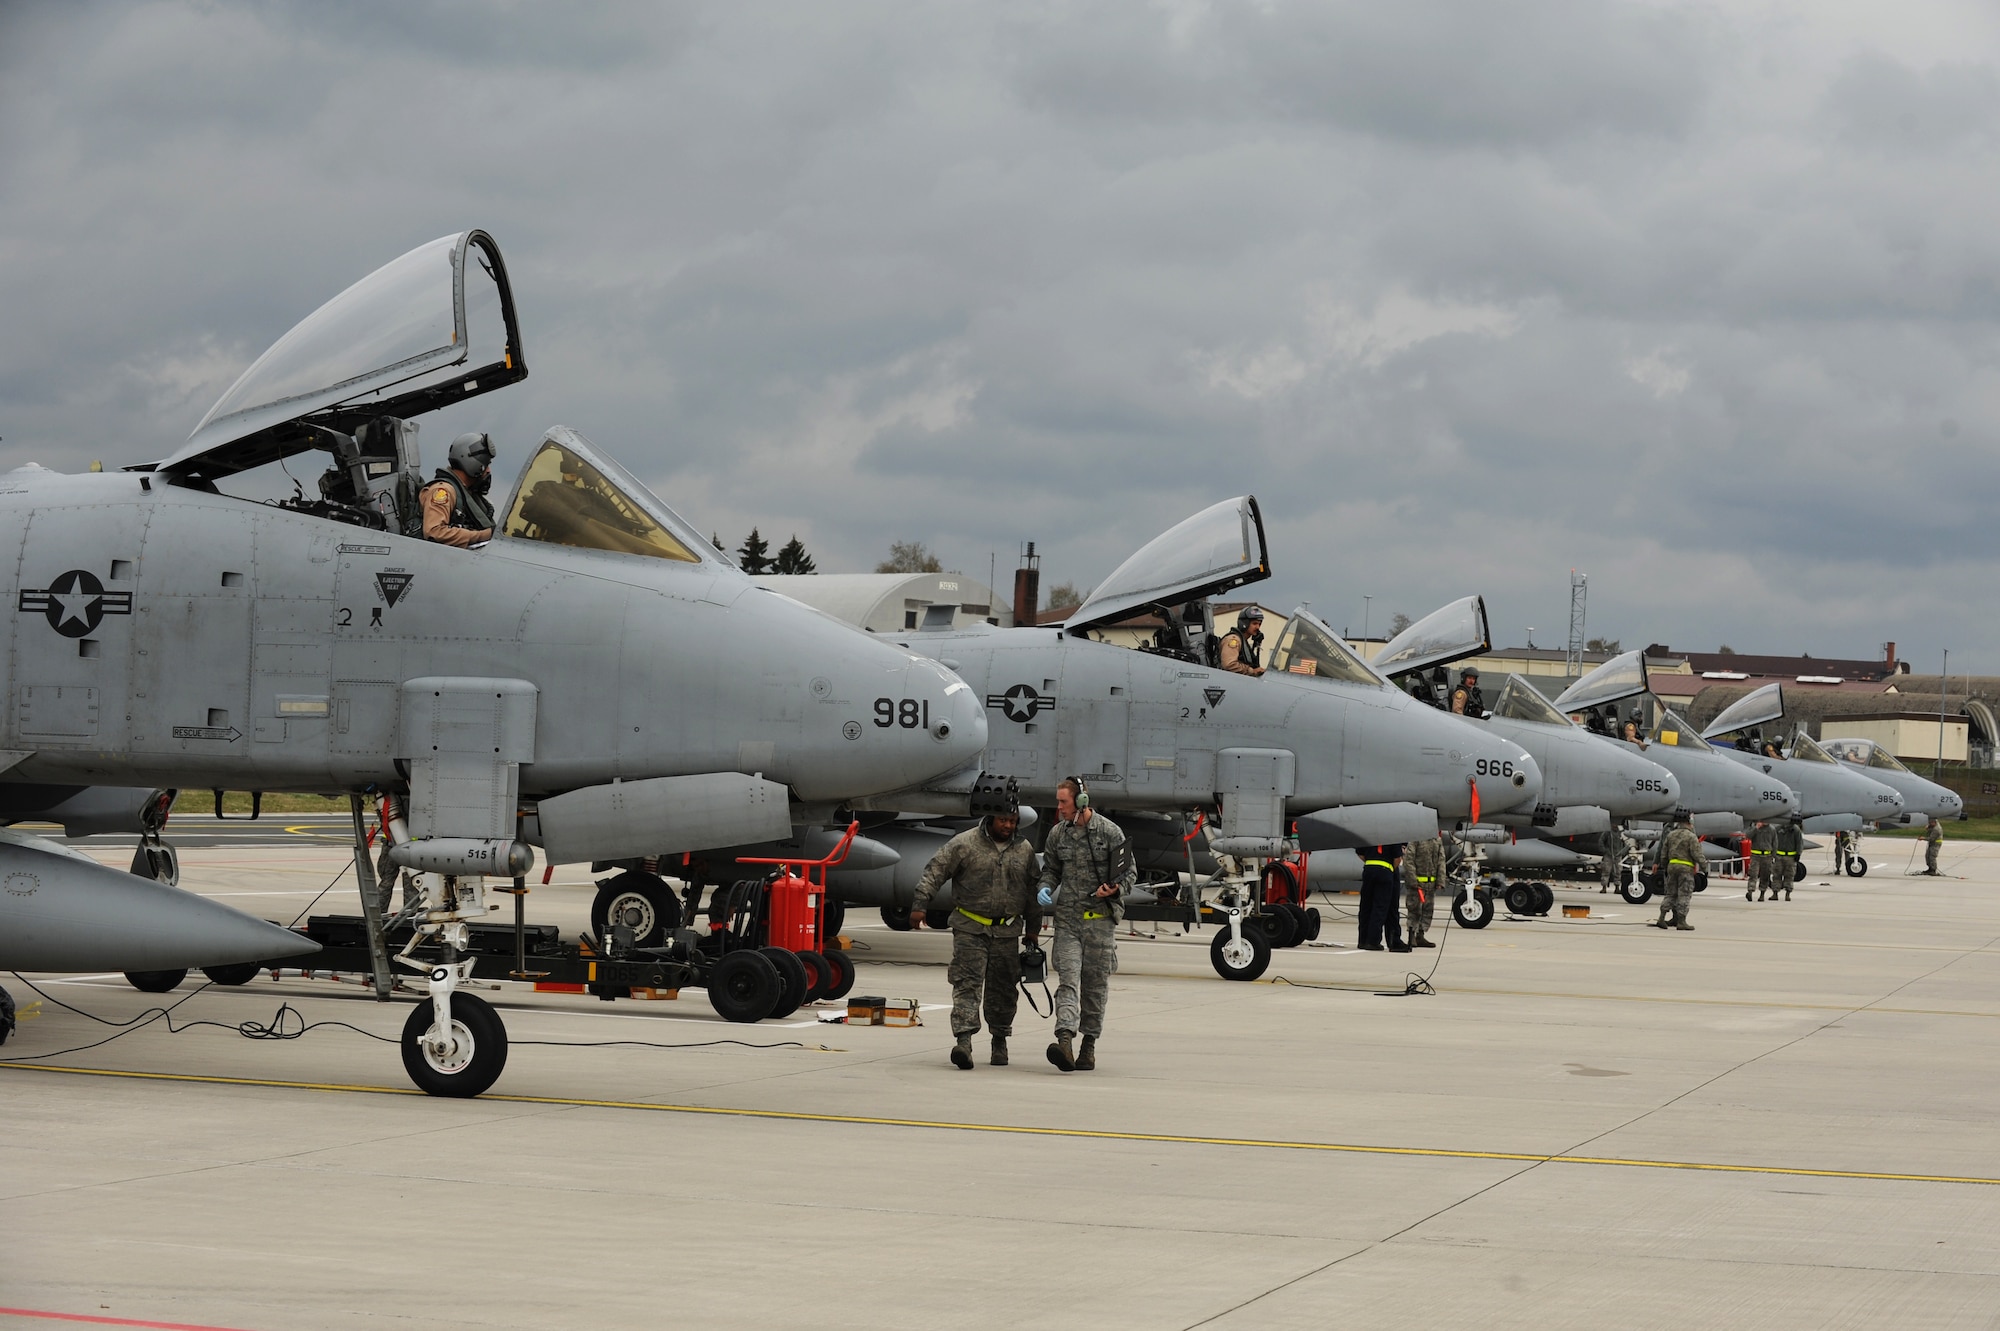 SPANGDAHLEM AIR BASE, Germany – A-10 Thunderbolt II pilots from the 81st Fighter Squadron prepare to exit their aircraft on Ramp 4 here April 10 after returning from a deployment to Bagram Airfield, Afghanistan. Friends and family waited by to greet six of the squadron’s pilots who had been providing close air support during Operation Enduring Freedom. (U.S. Air Force photo by Airman 1st Class Matthew B. Fredericks/Released)